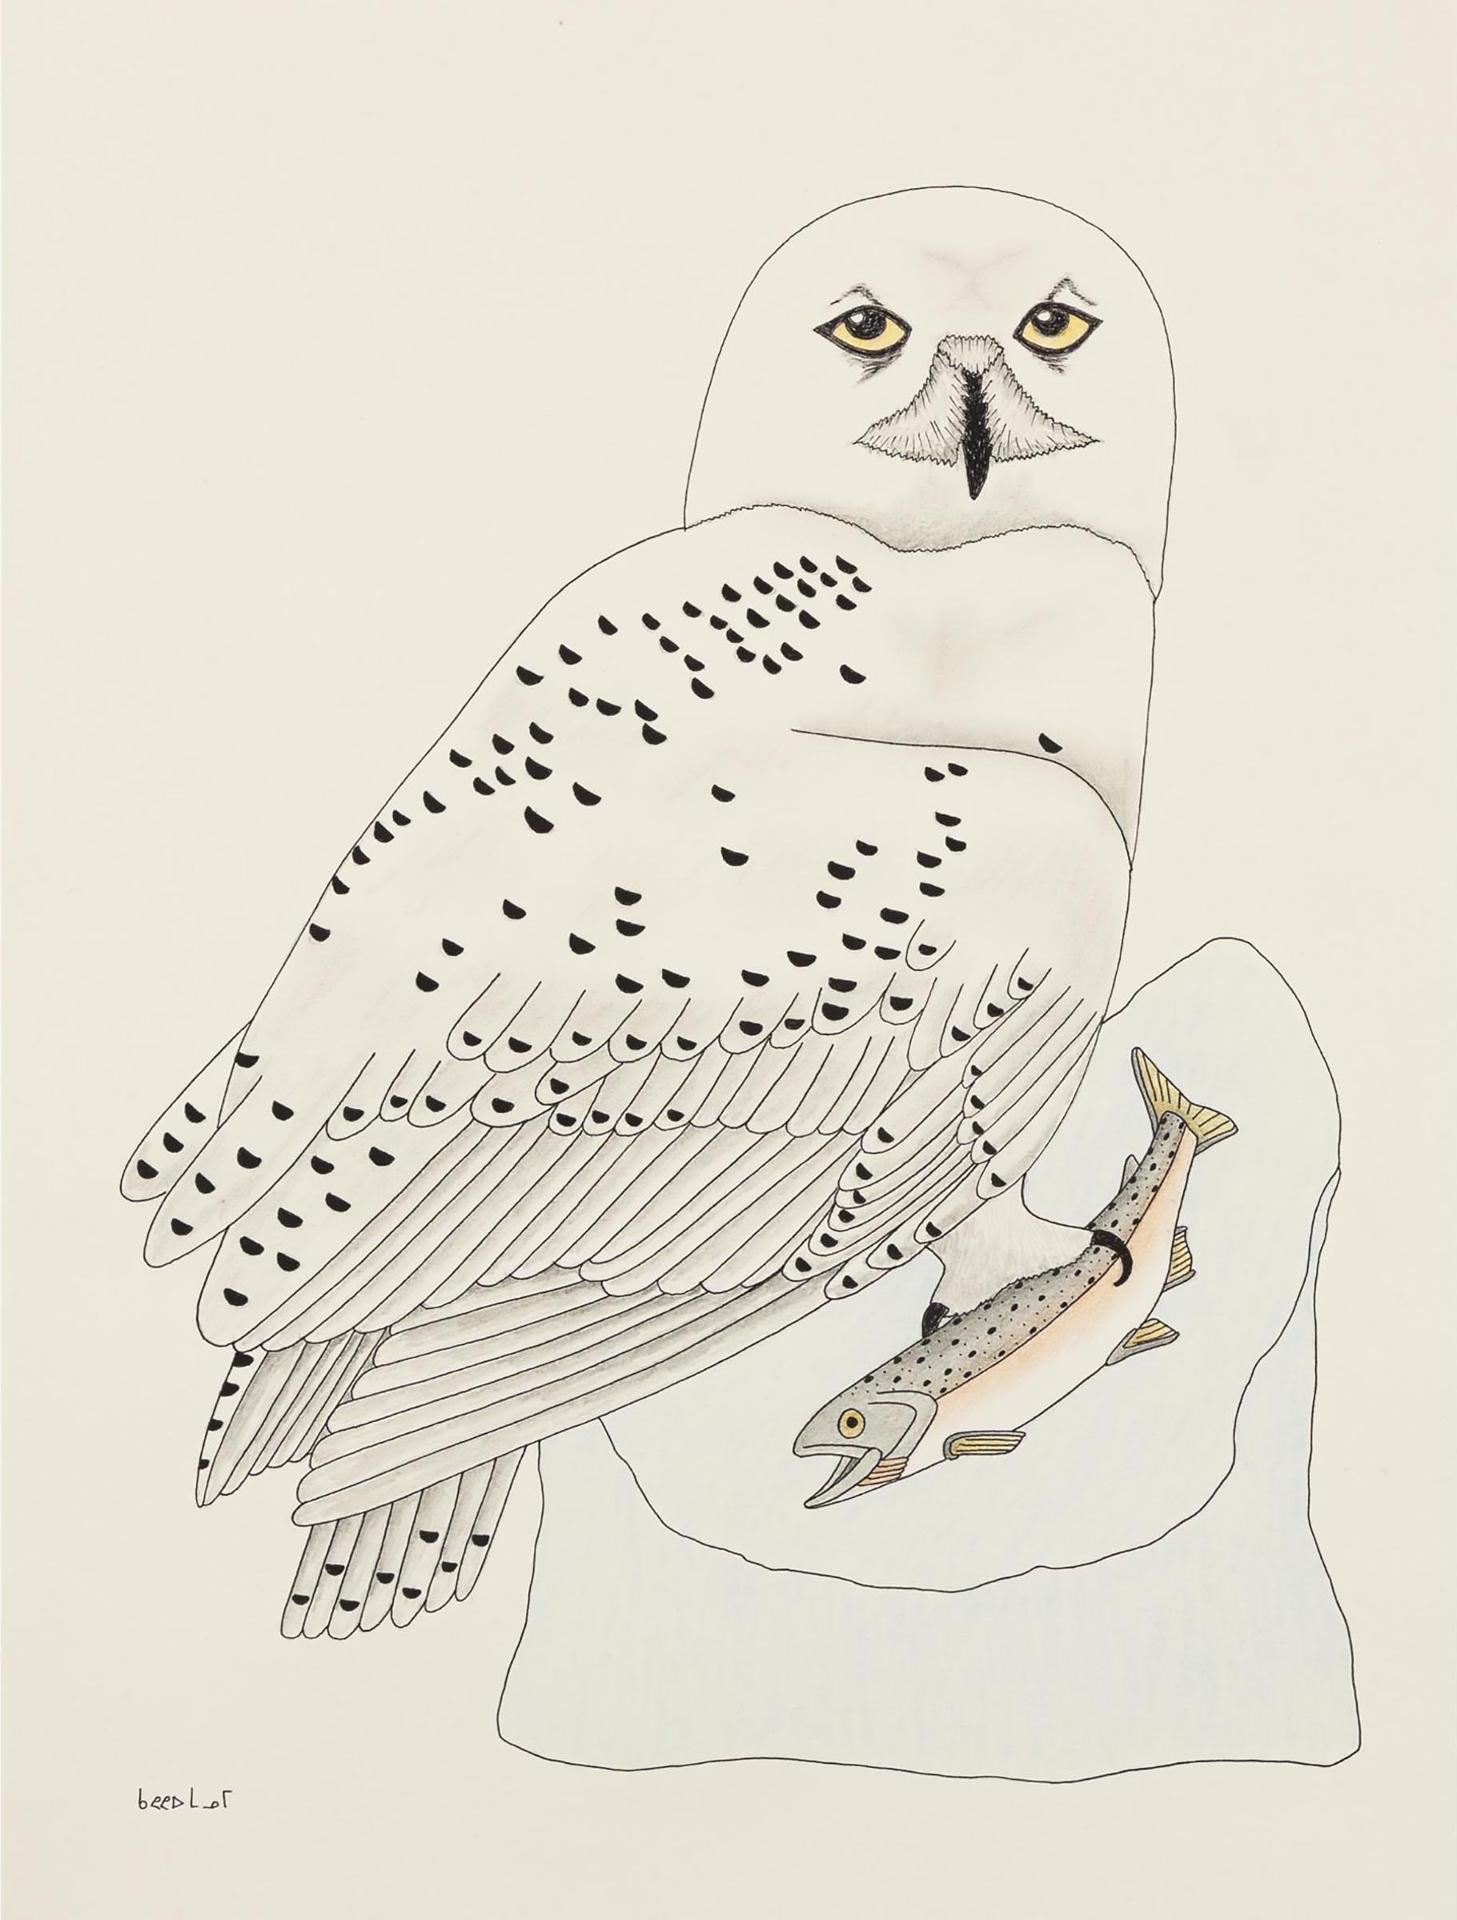 Kavovaow Mannomee (1958) - Owl With Catch